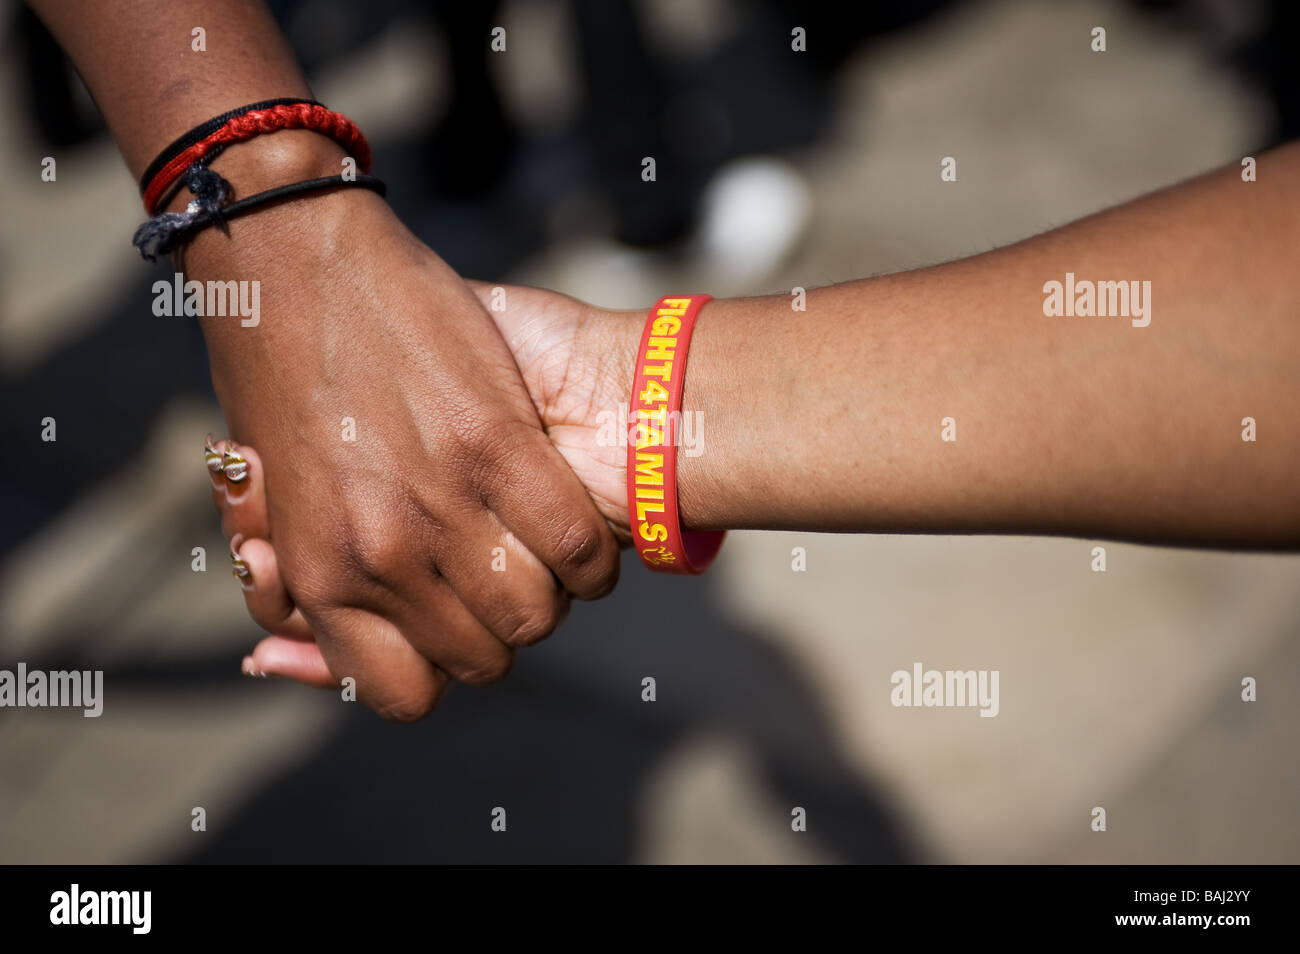 Students holding hands at the Tamil demonstration protest in London. Stock Photo